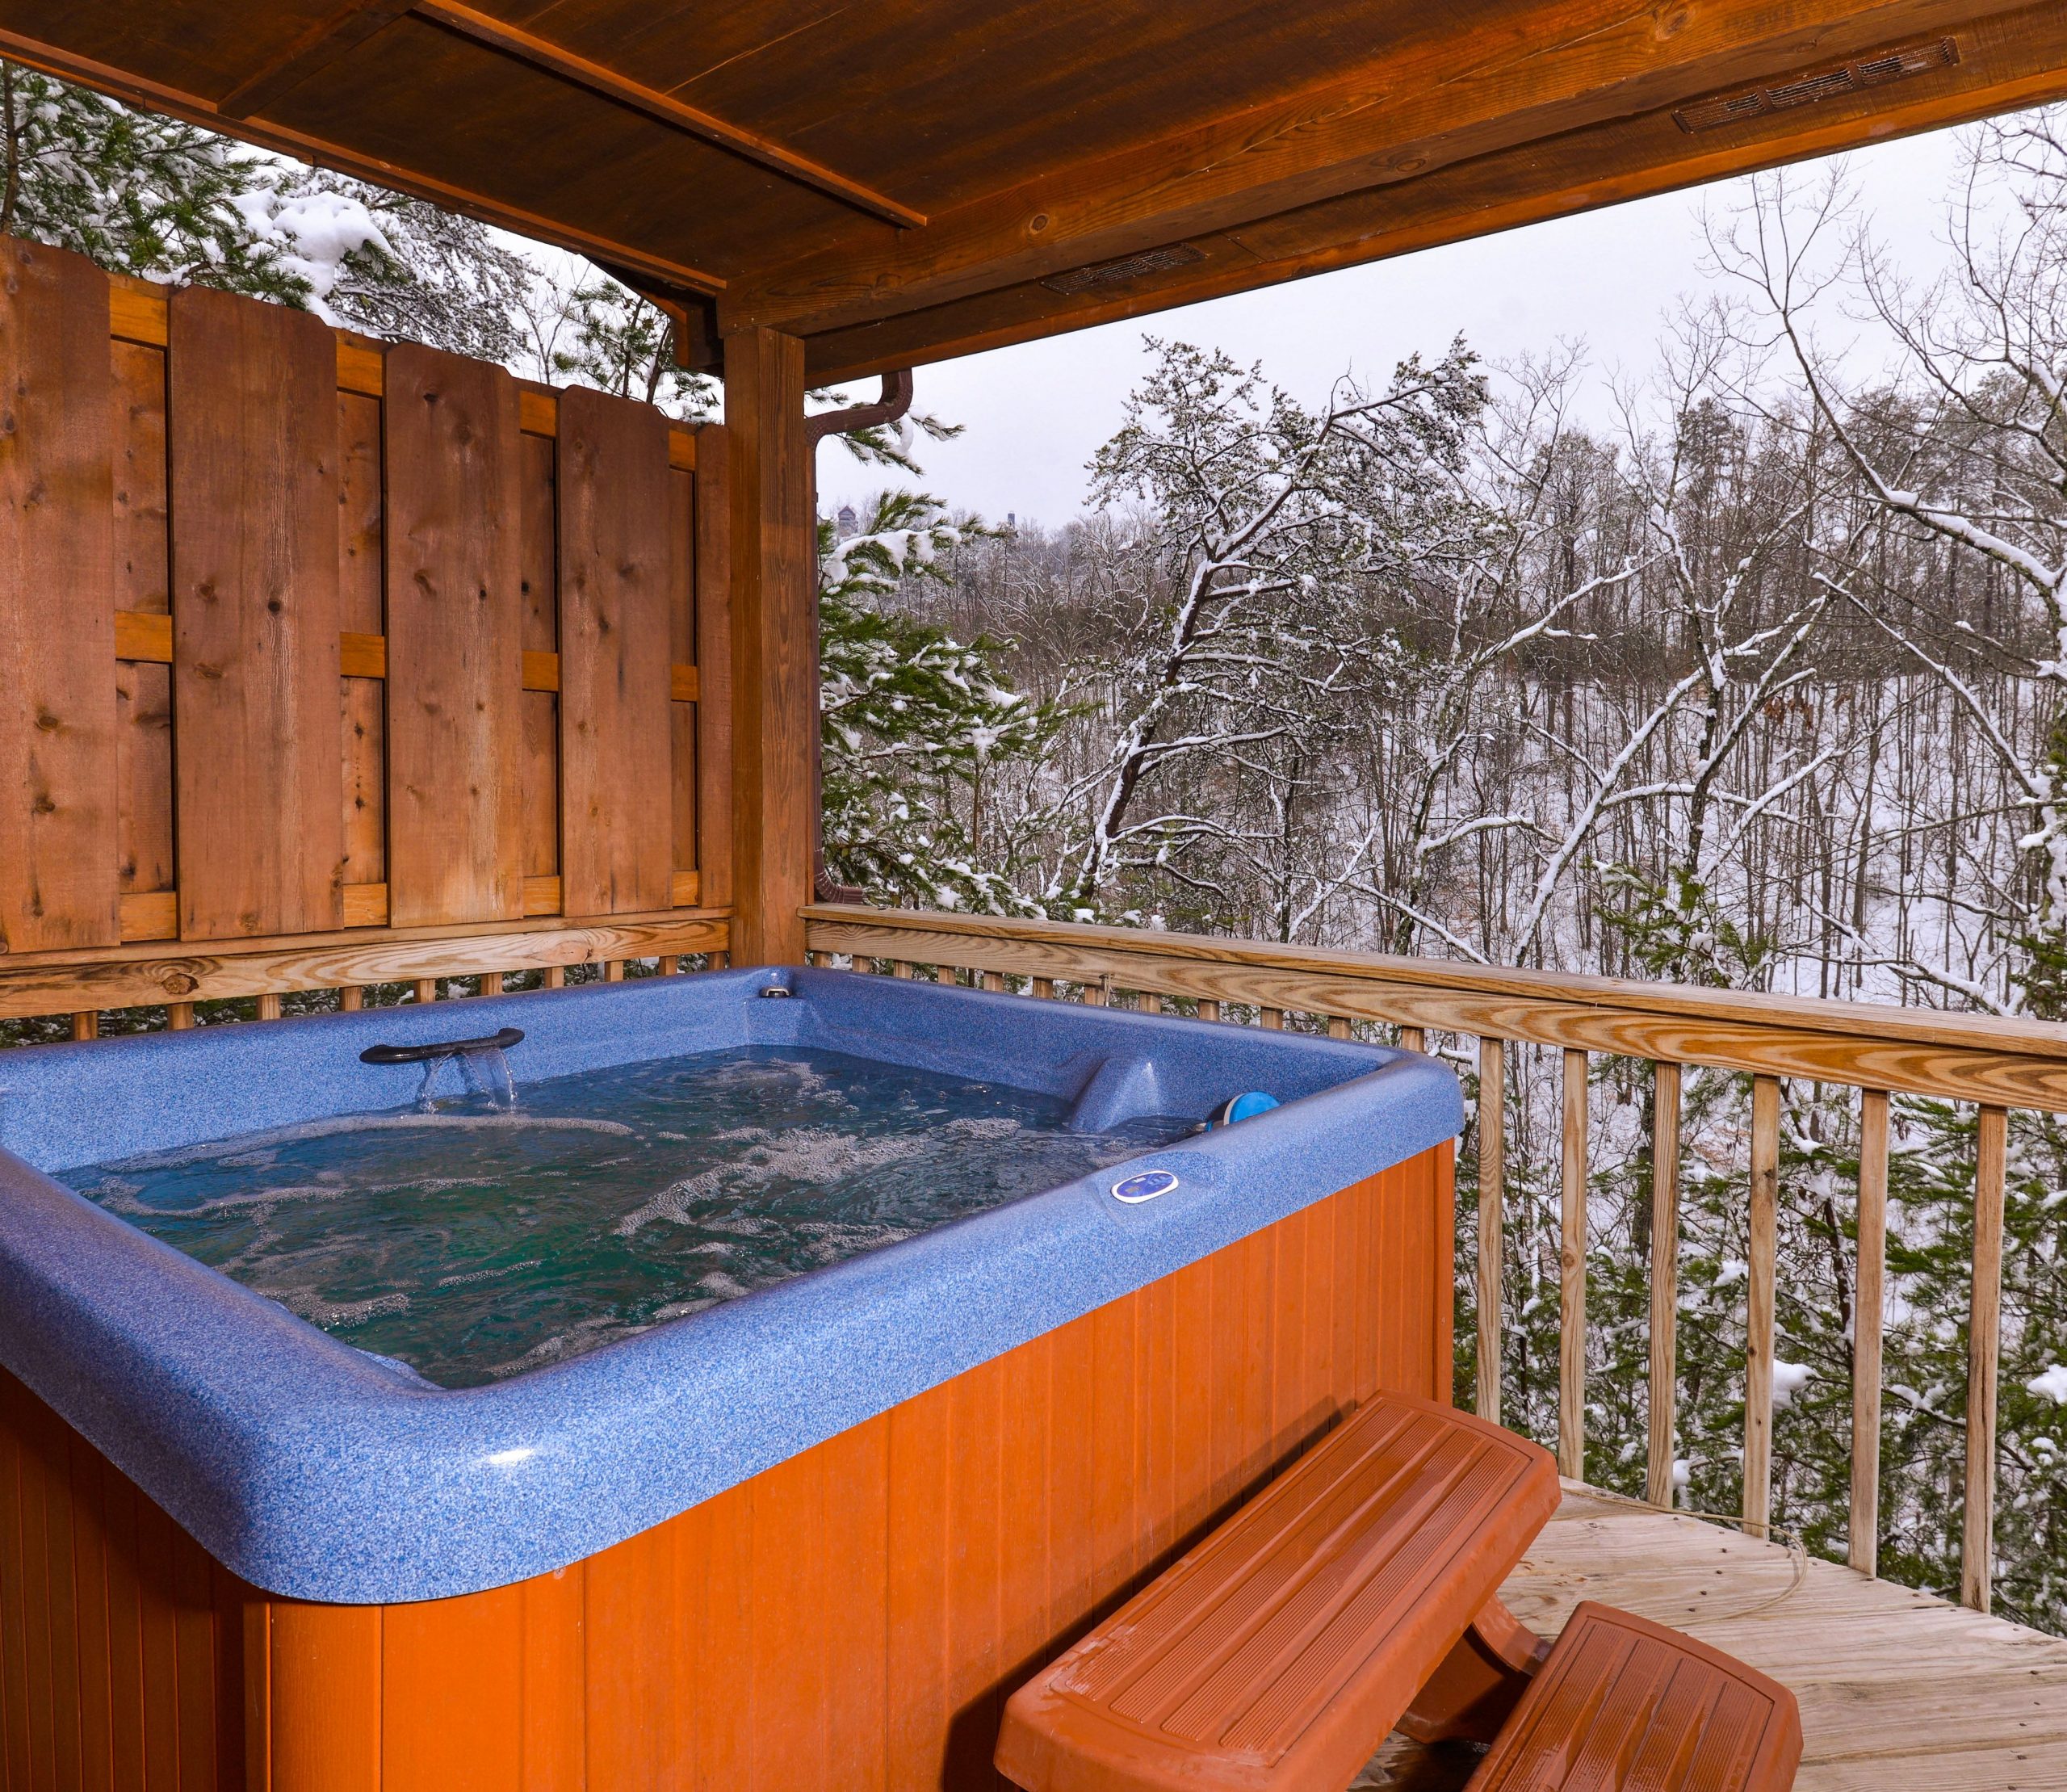 Hot tubs in cold weather. Yes, please.